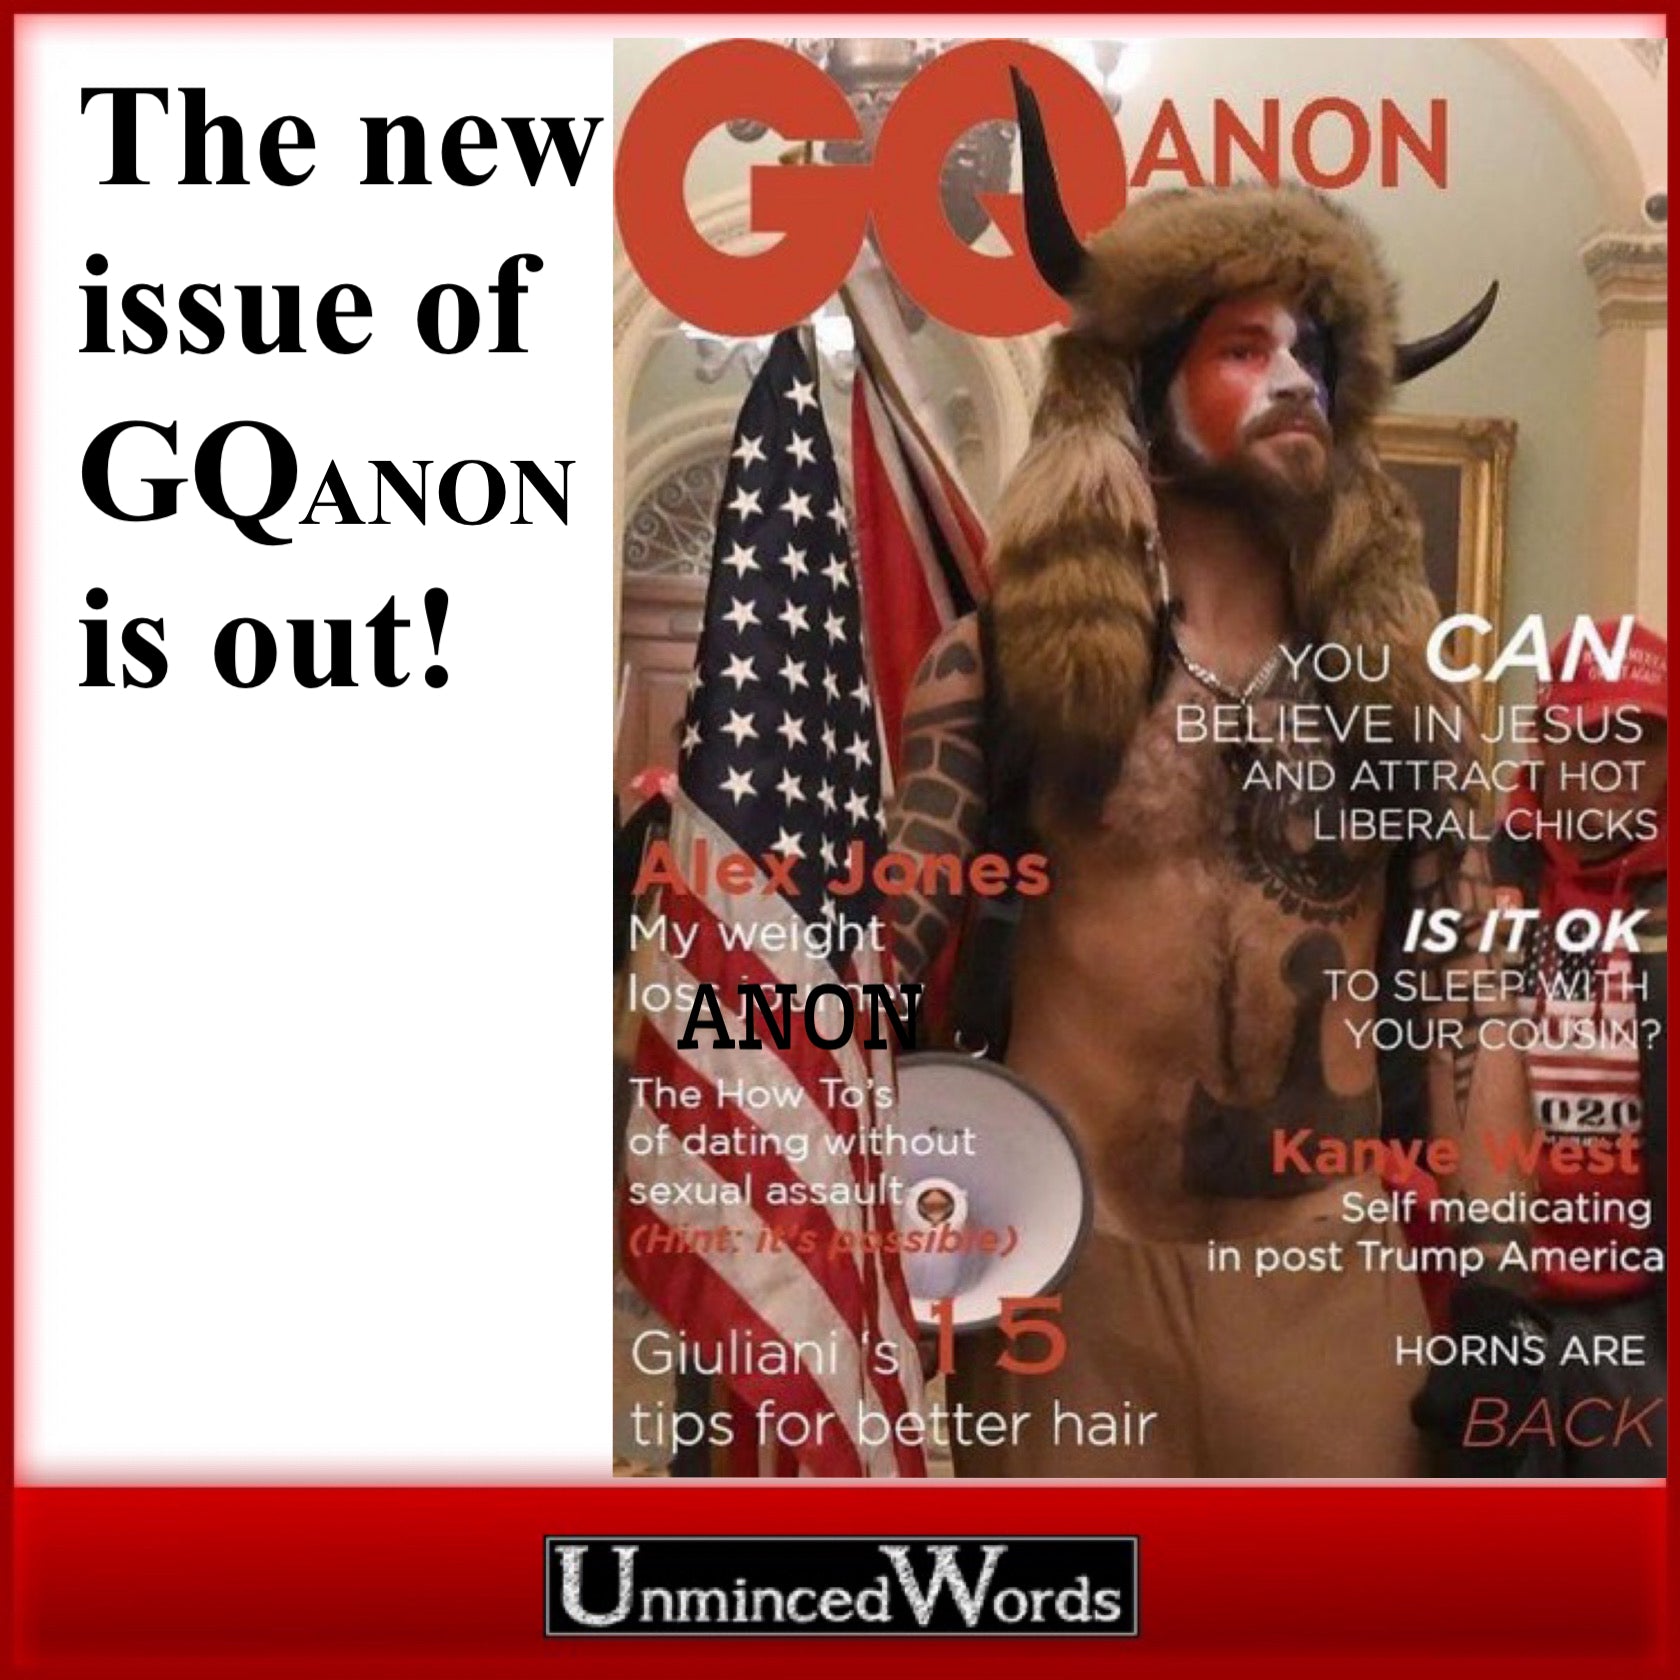 The new issue of GQanon is out!